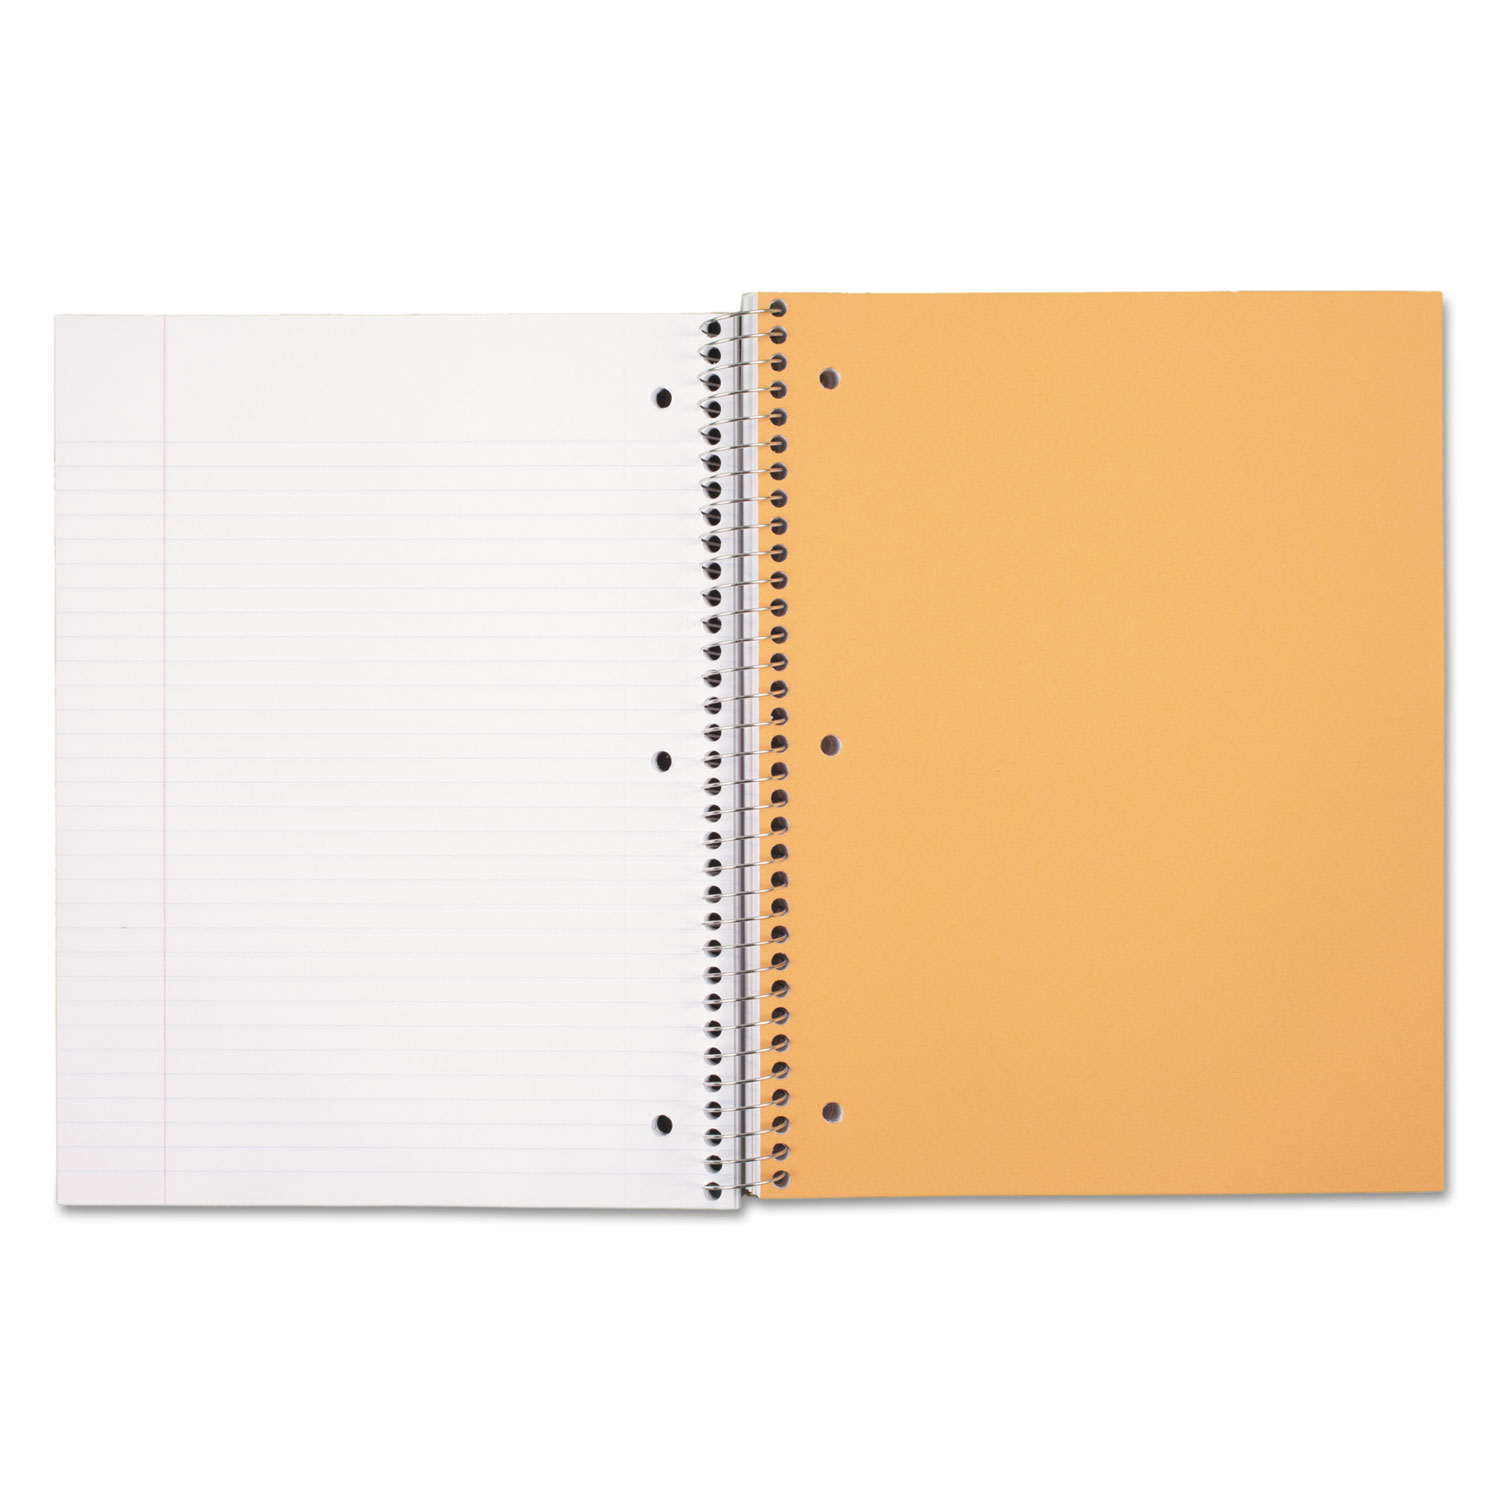 1 subject 100 sheets 8.5x11 spiral bound notebook